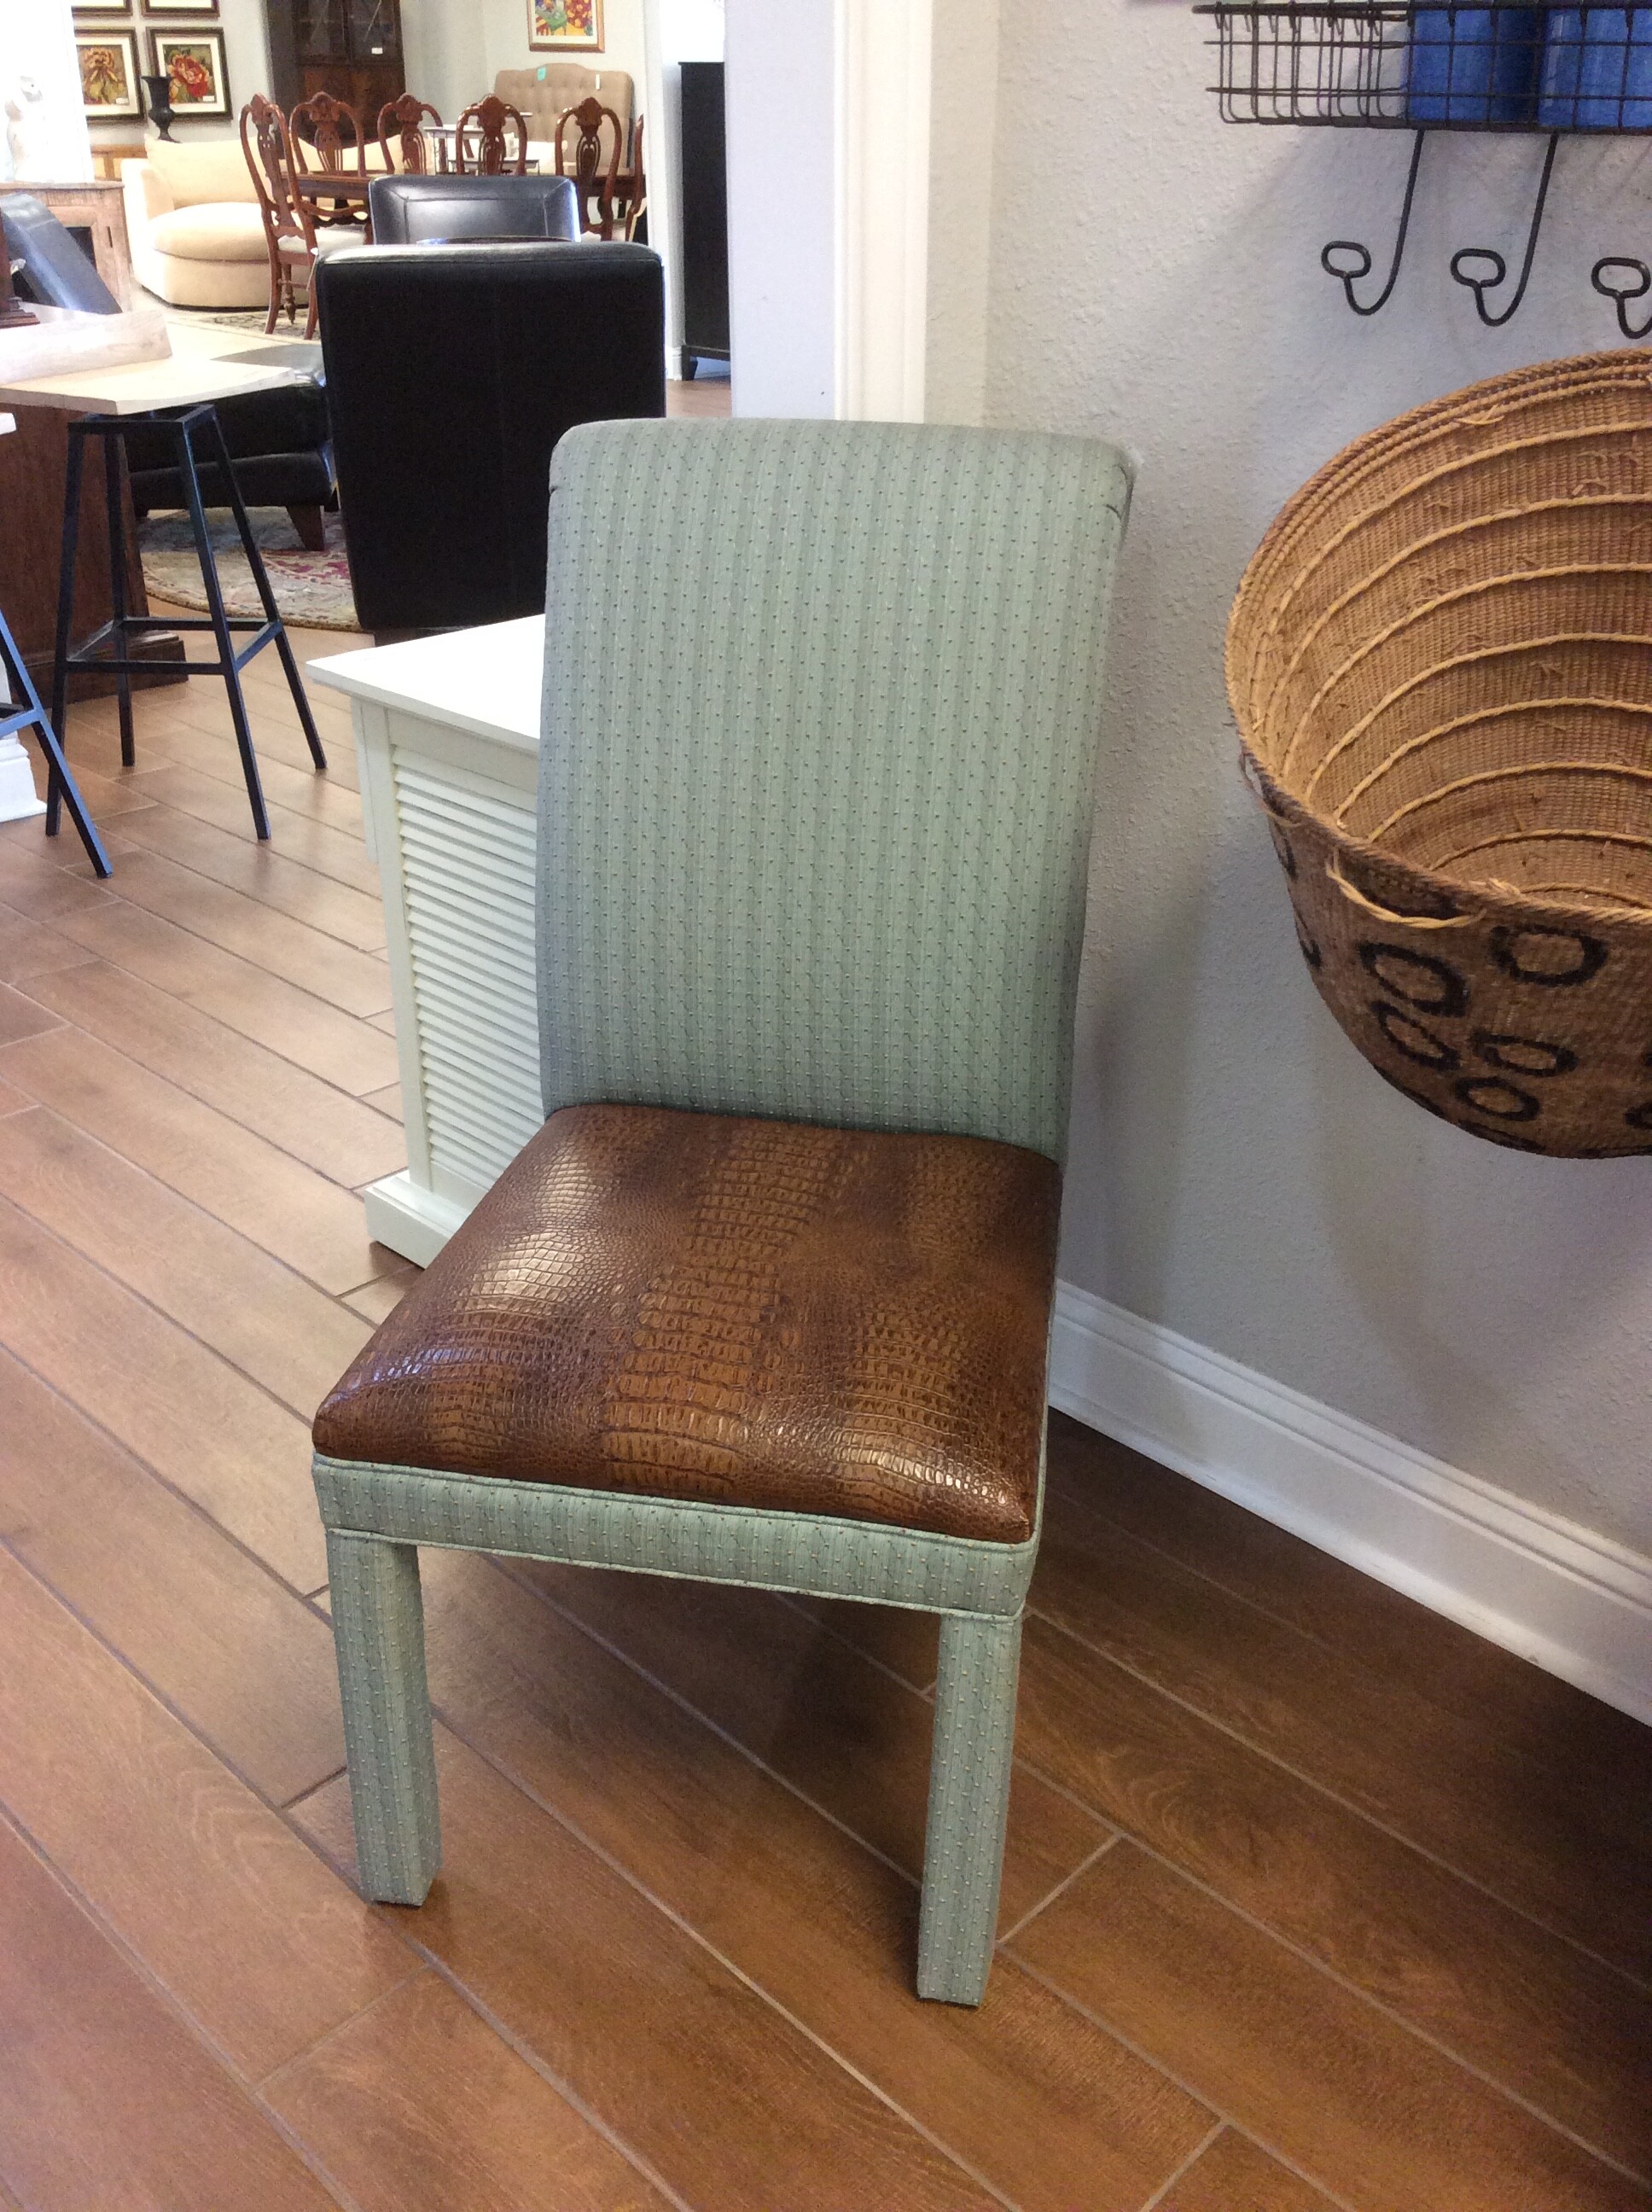 This side chair is a lovely combination of teal and brown. The frame has been upholstered in a soft teal, the chairseat and back in brown leather.